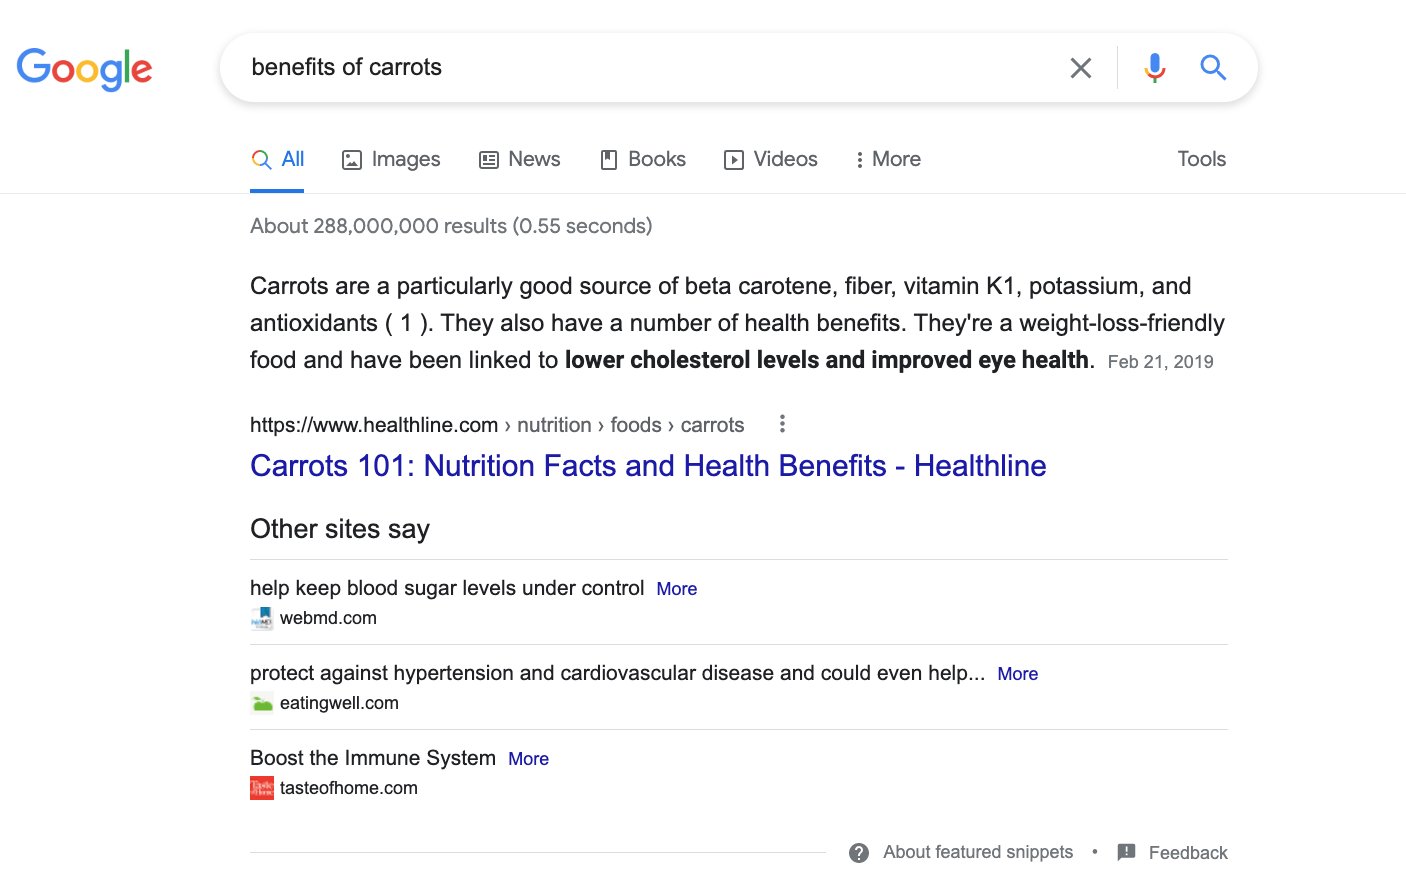 Google: neues Featured Snippet 'Other sites say'